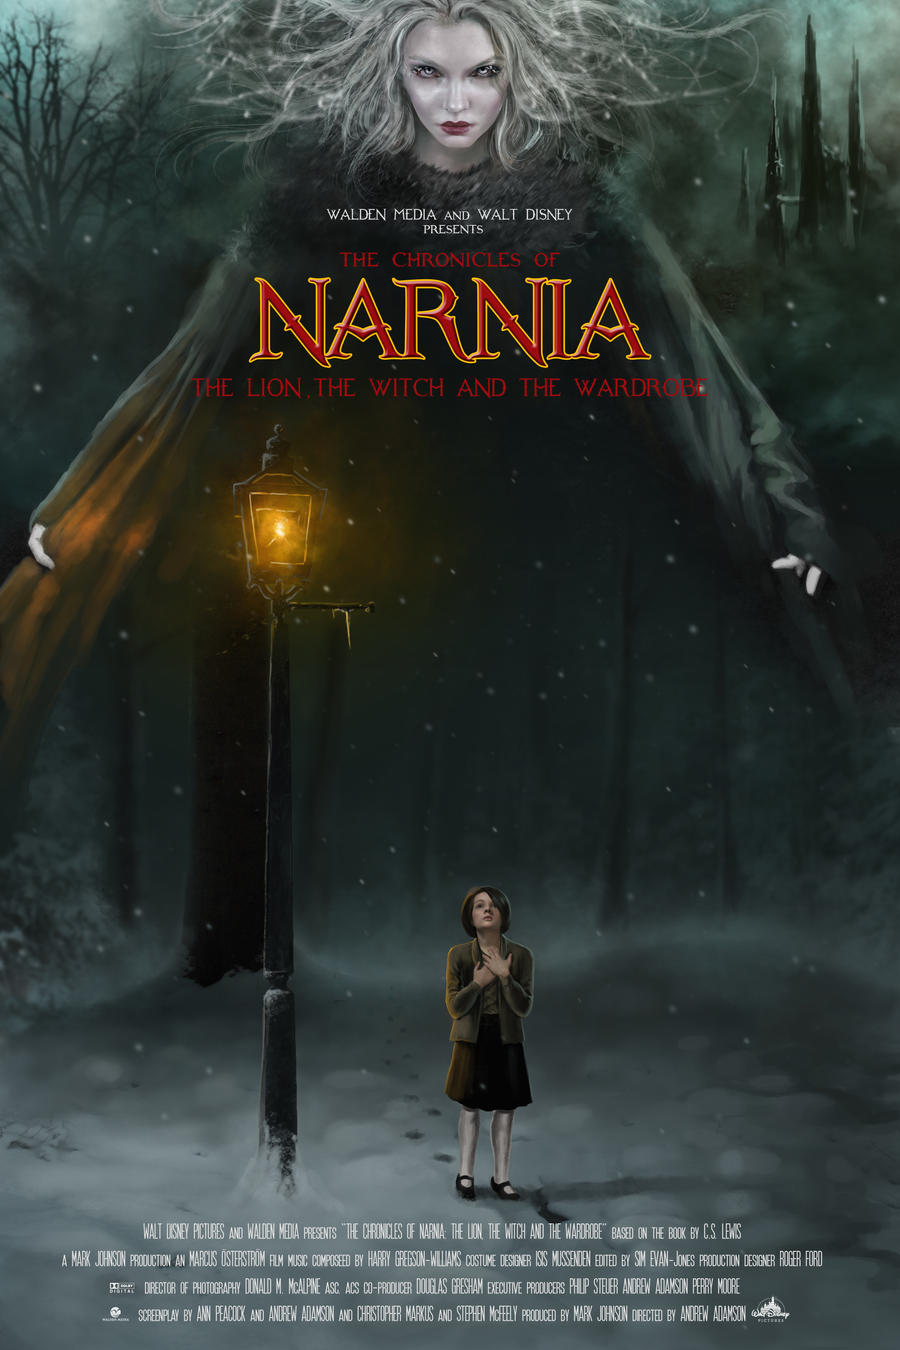 The lion, the witch and the wardrobe movie poster by FantasyMaker on ...